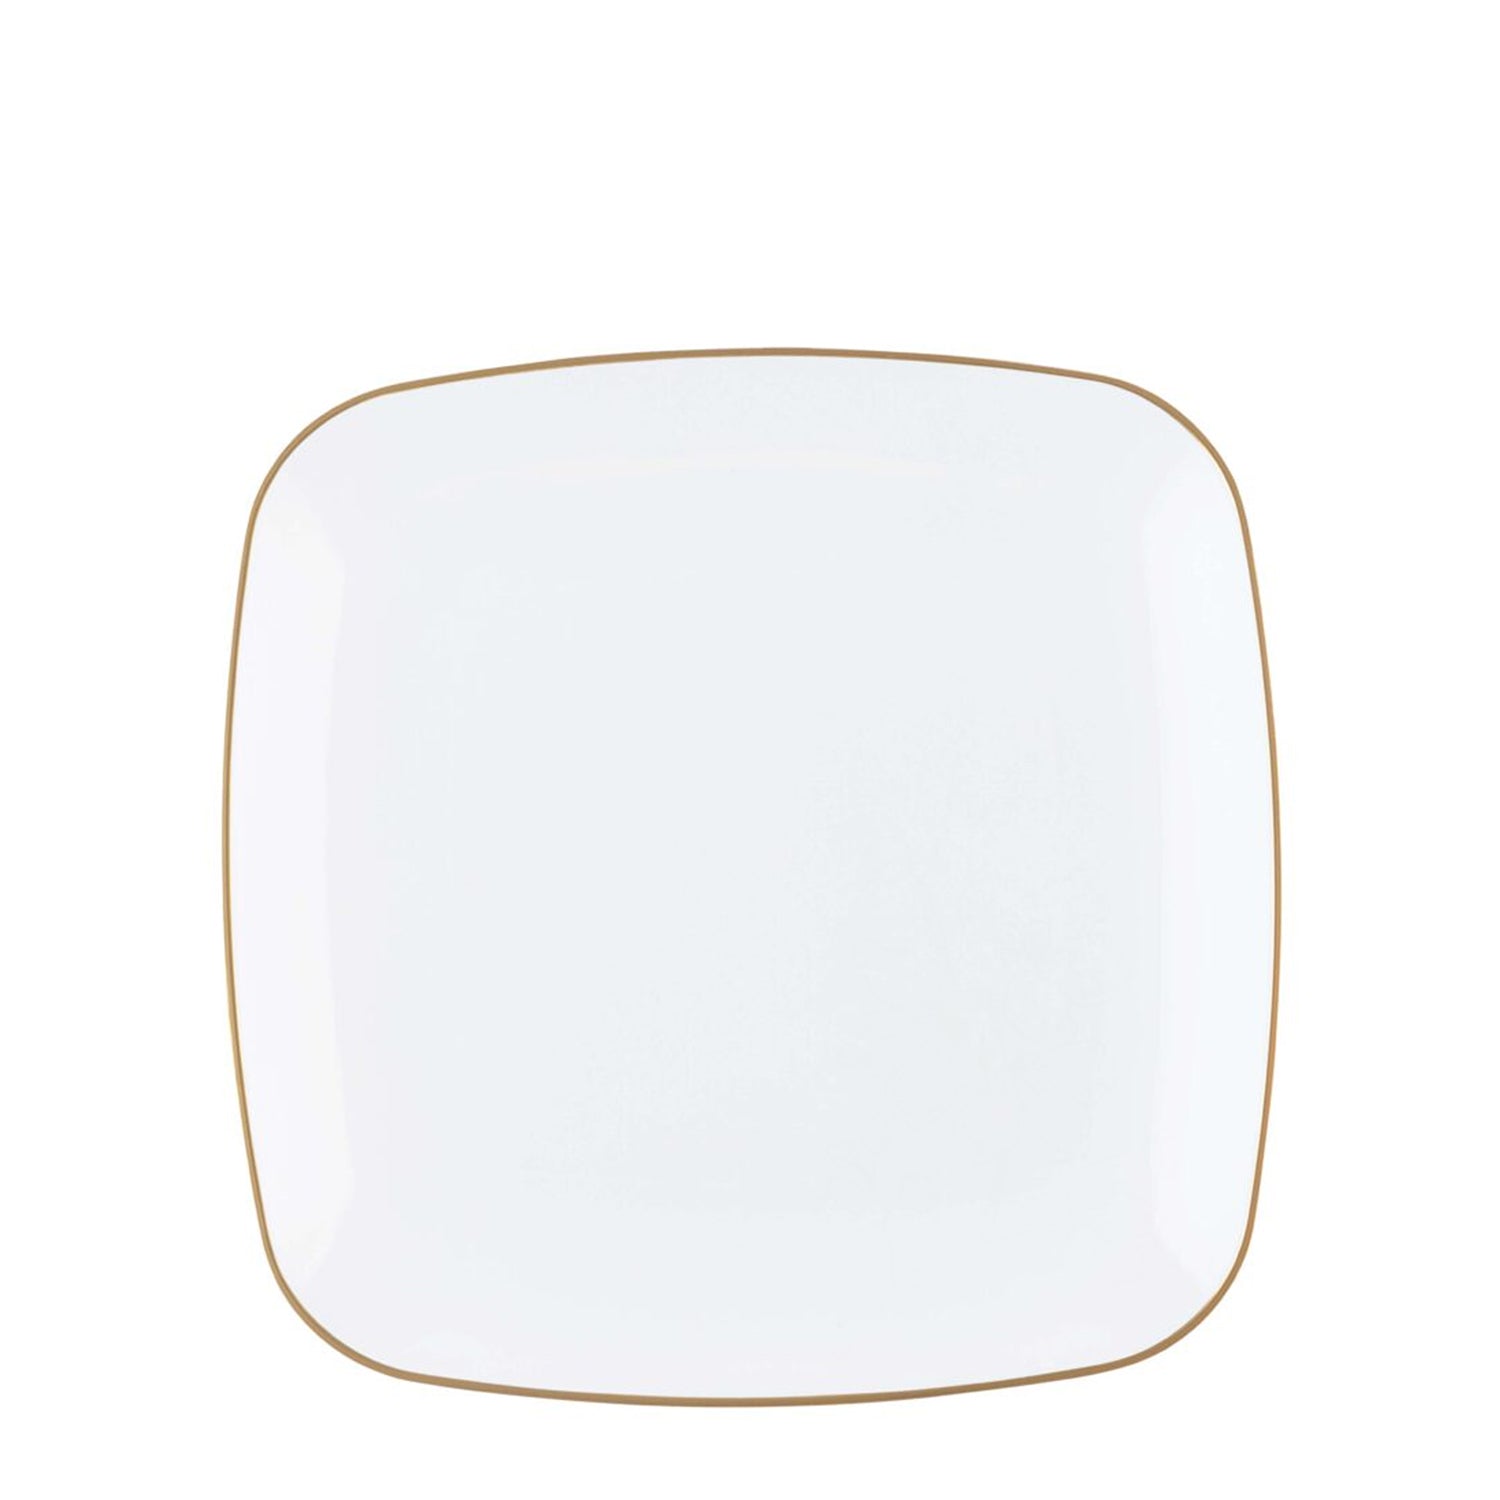 Organic Collection White and Gold Rim Square Dinner Plates 7.25" Tablesettings Blue Sky 10 Pieces  